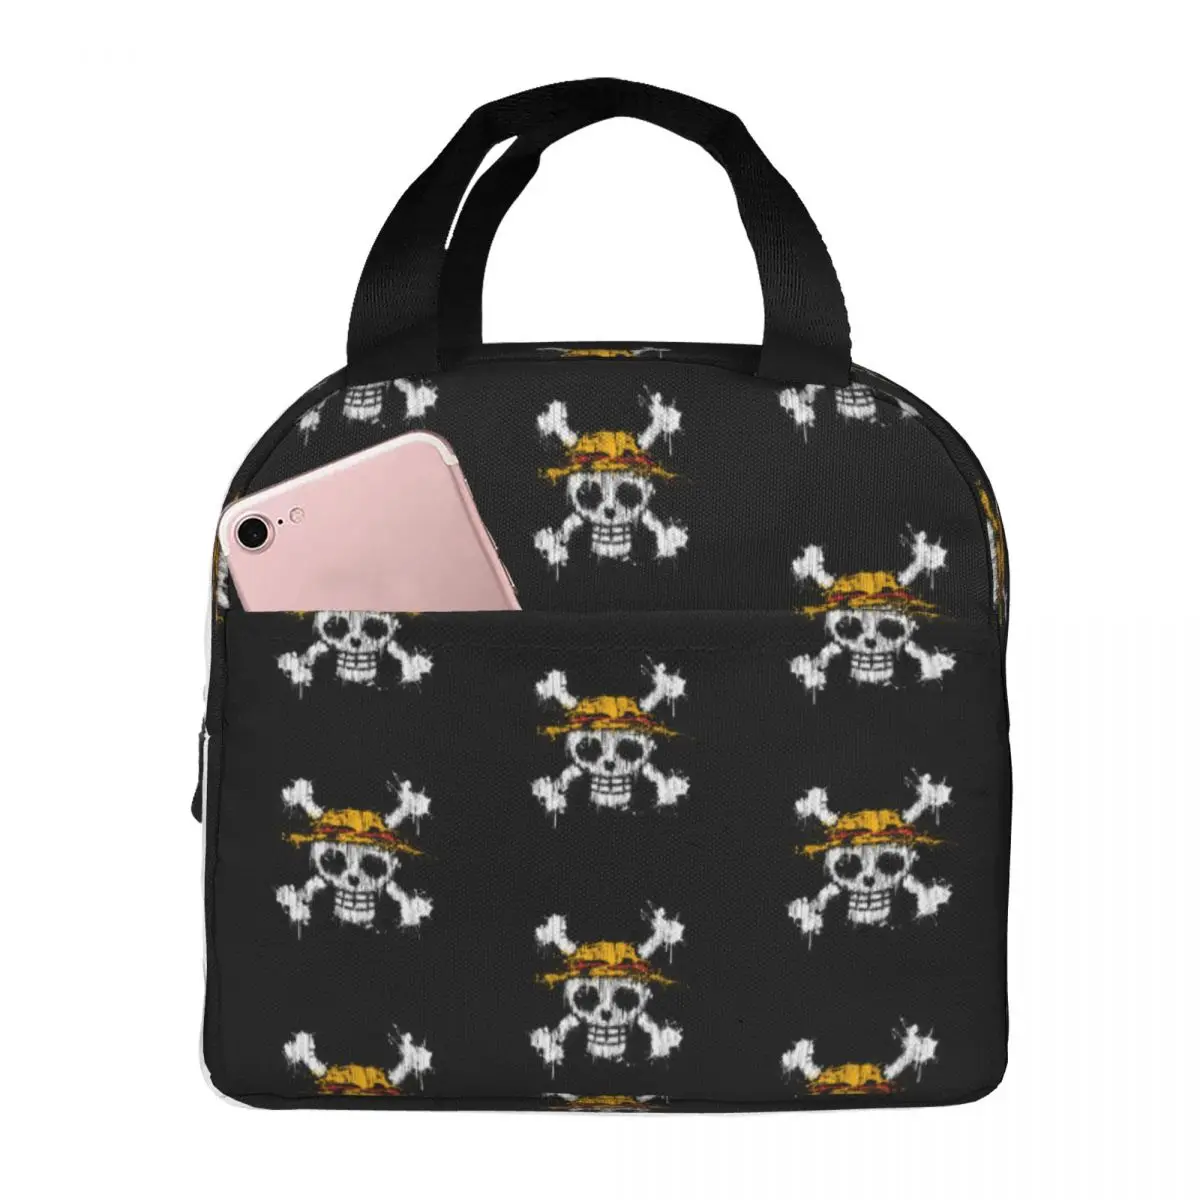 One Piece Skull Anime Lunch Bags Portable Insulated Oxford Cooler Thermal Picnic Lunch Box for Women Girl